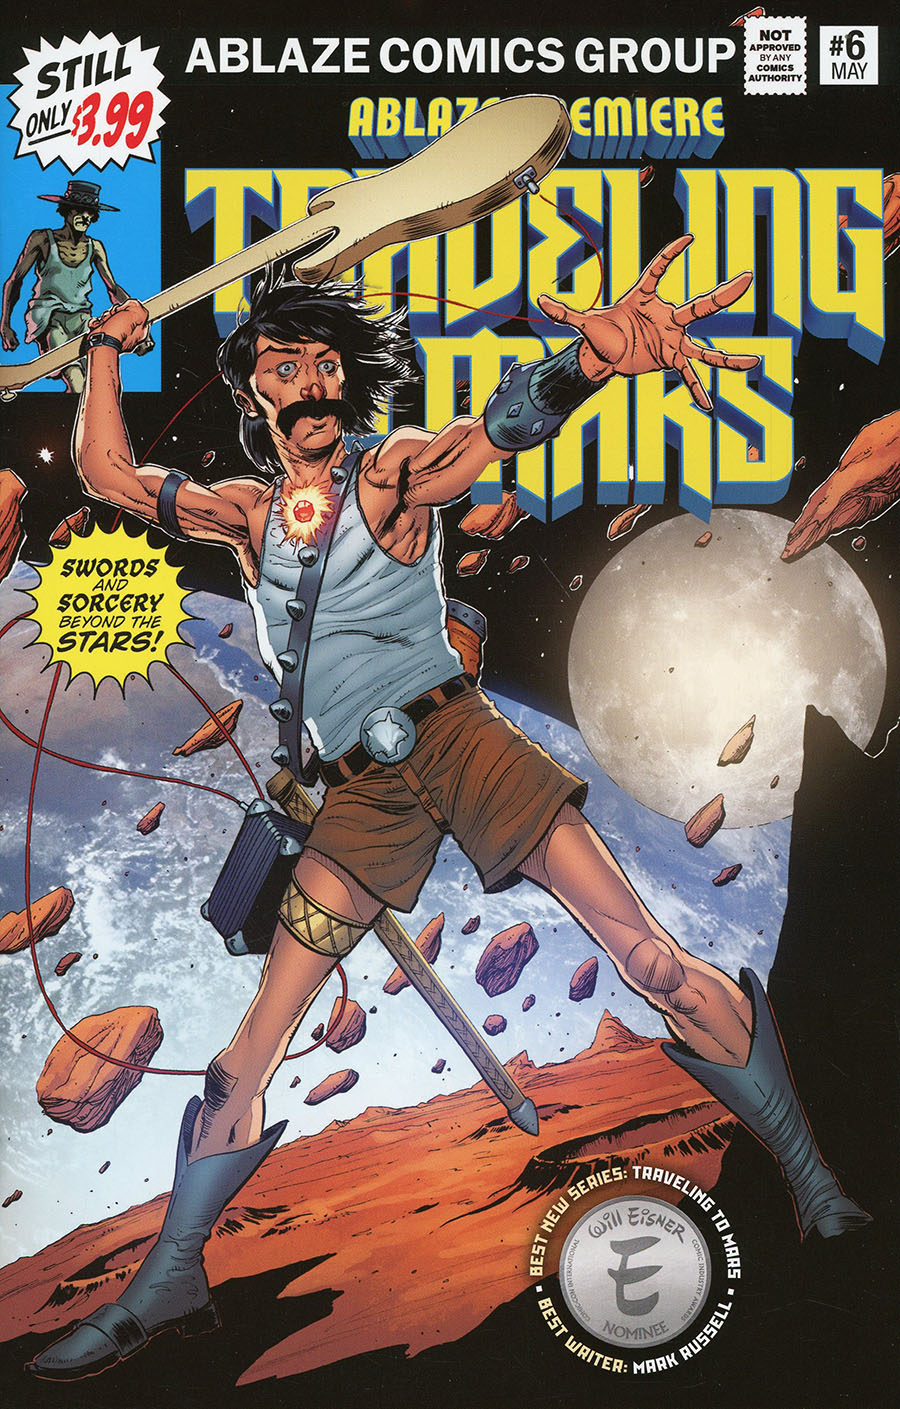 Traveling To Mars #6 Cover D Variant Brent McKee Marvel Premiere 45 Featuring Man-Wolf Parody Cover